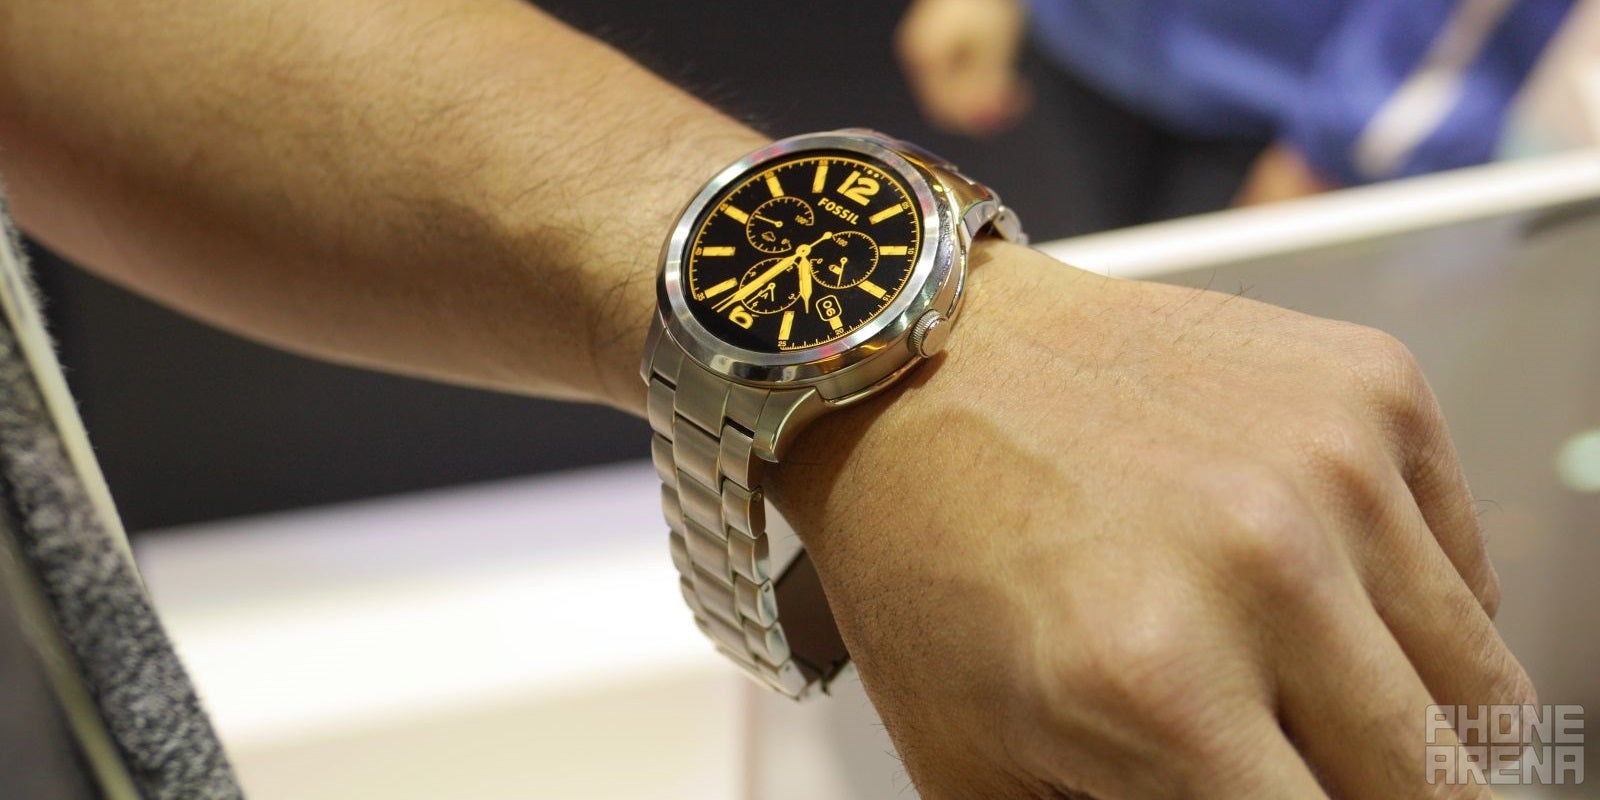 Fossil Q Founder smartwatch: hands-on